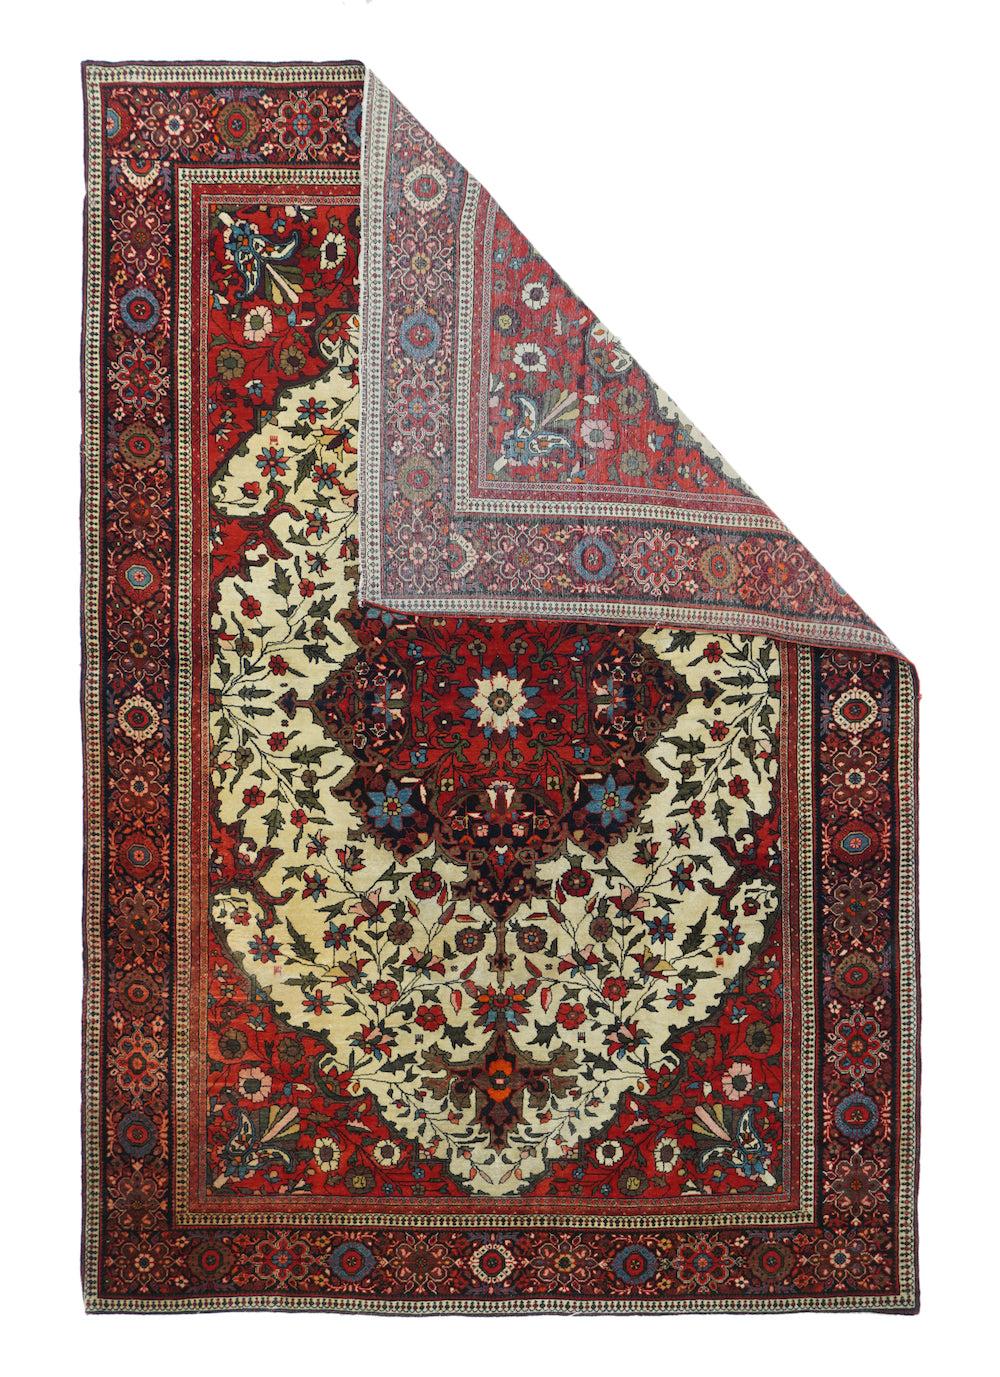 Sarouk rugs have been produced for much of the 20th century. The early successes of the Sarouk rug are largely owed to the American market. From the 1910s-1950s, the 